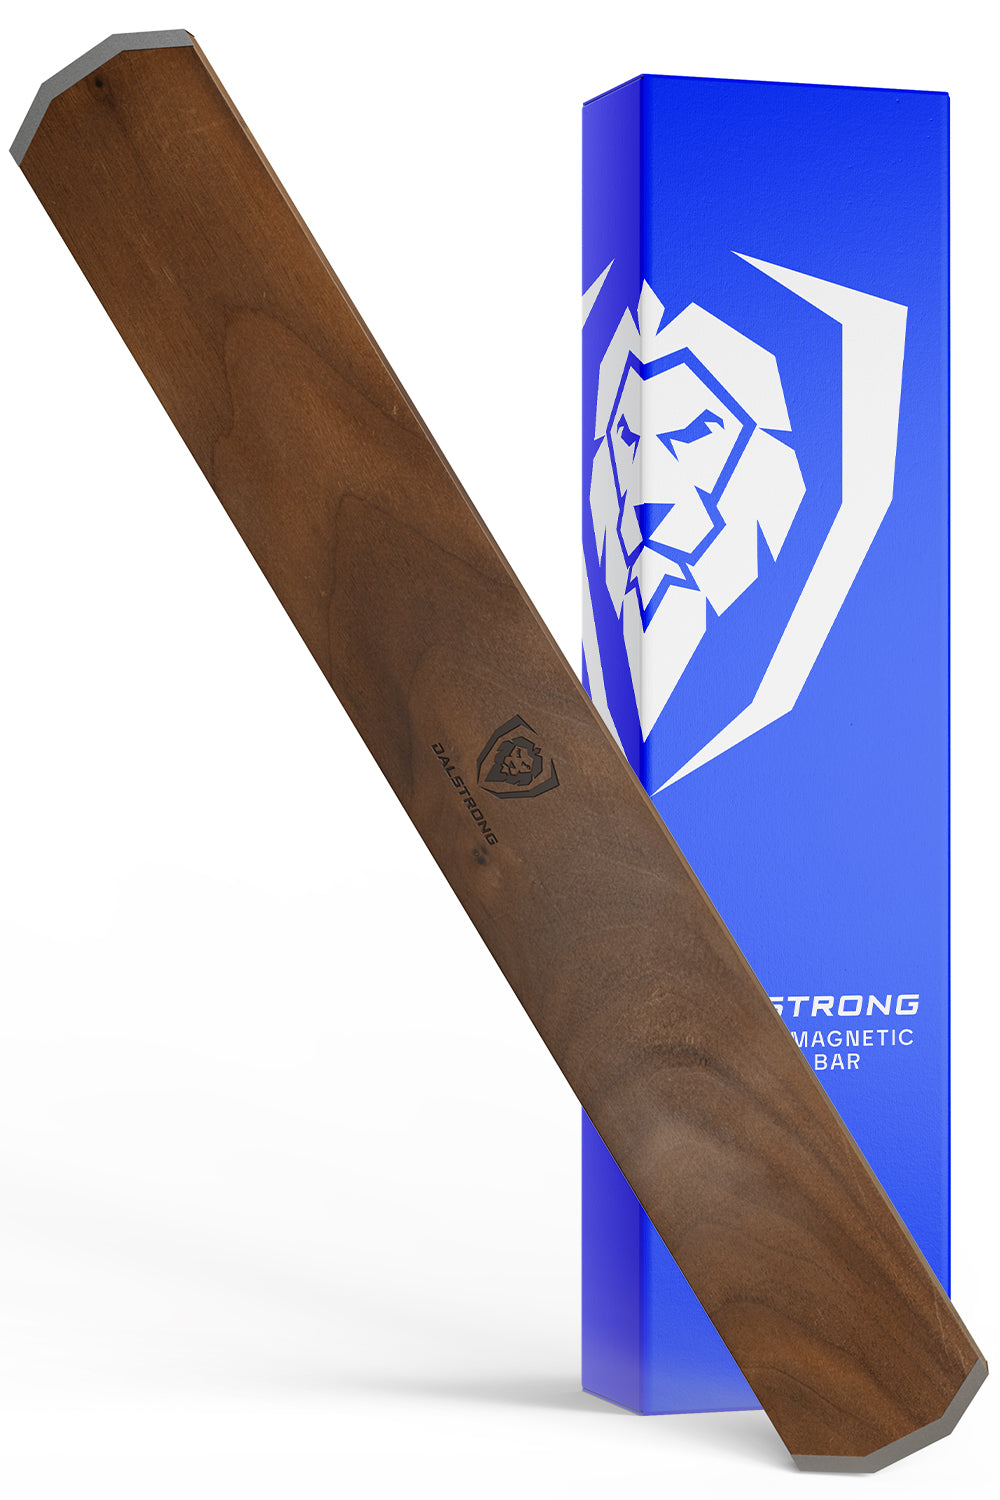 Dalstrong magnetic bar walnut wall knife holder in front of it's premium packaging.